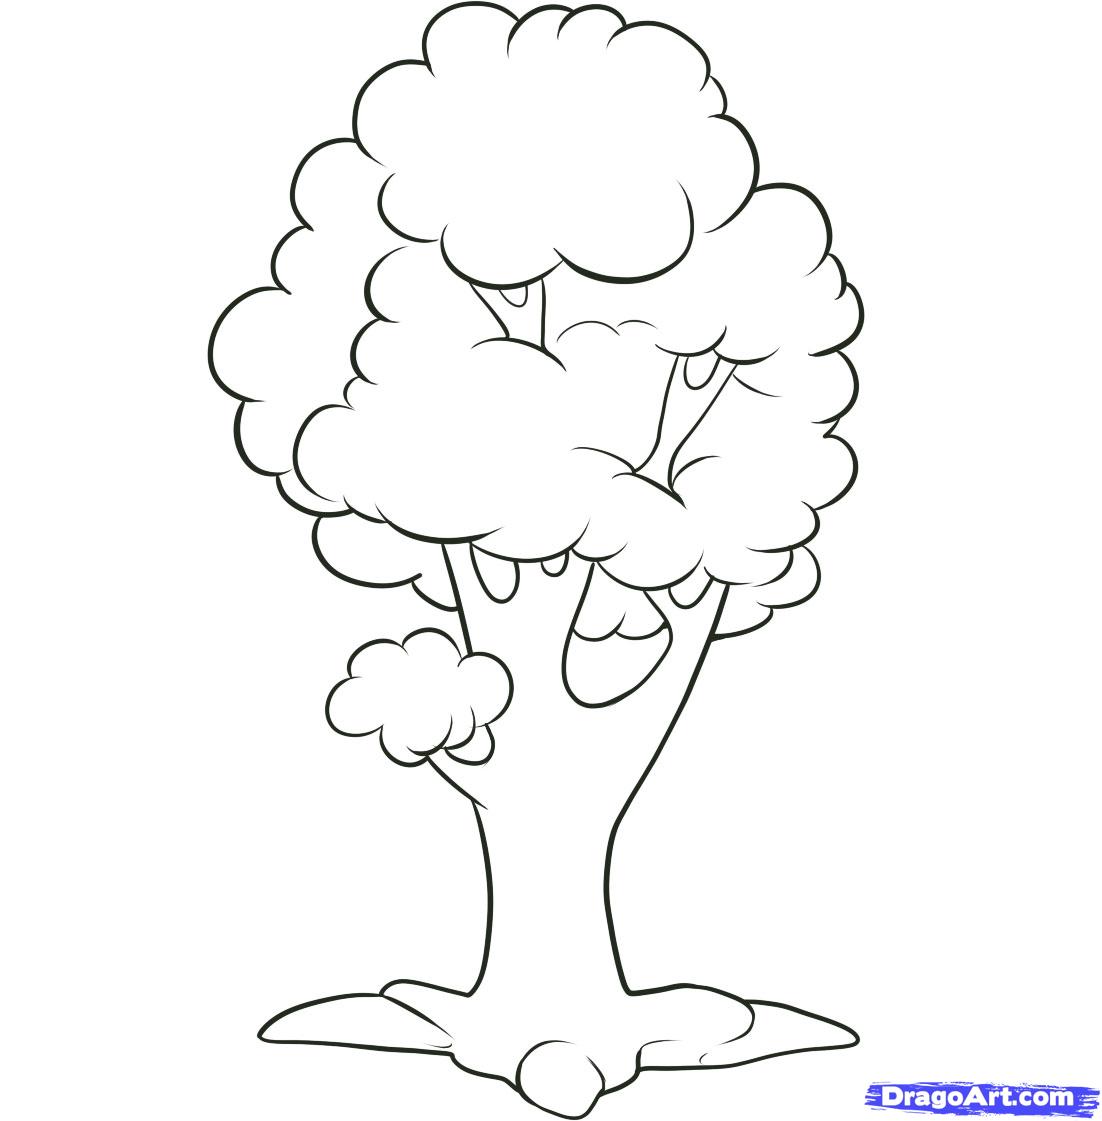 Free Simple Tree Drawings, Download Free Clip Art, Free Clip.